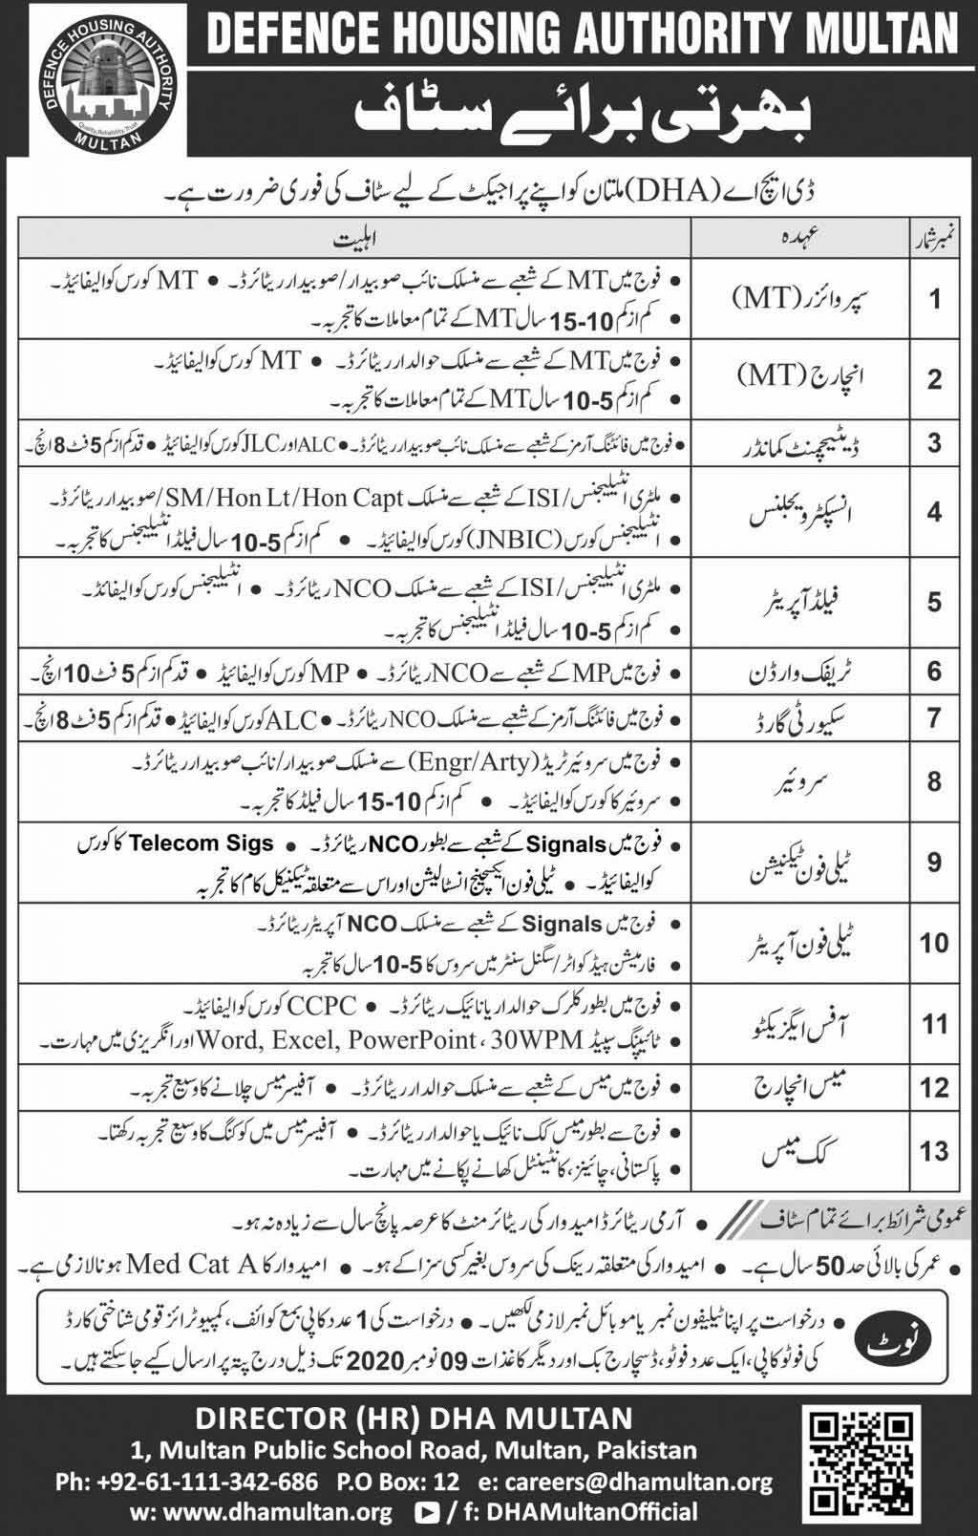 DHA Multan Jobs in Defence Housing Authority